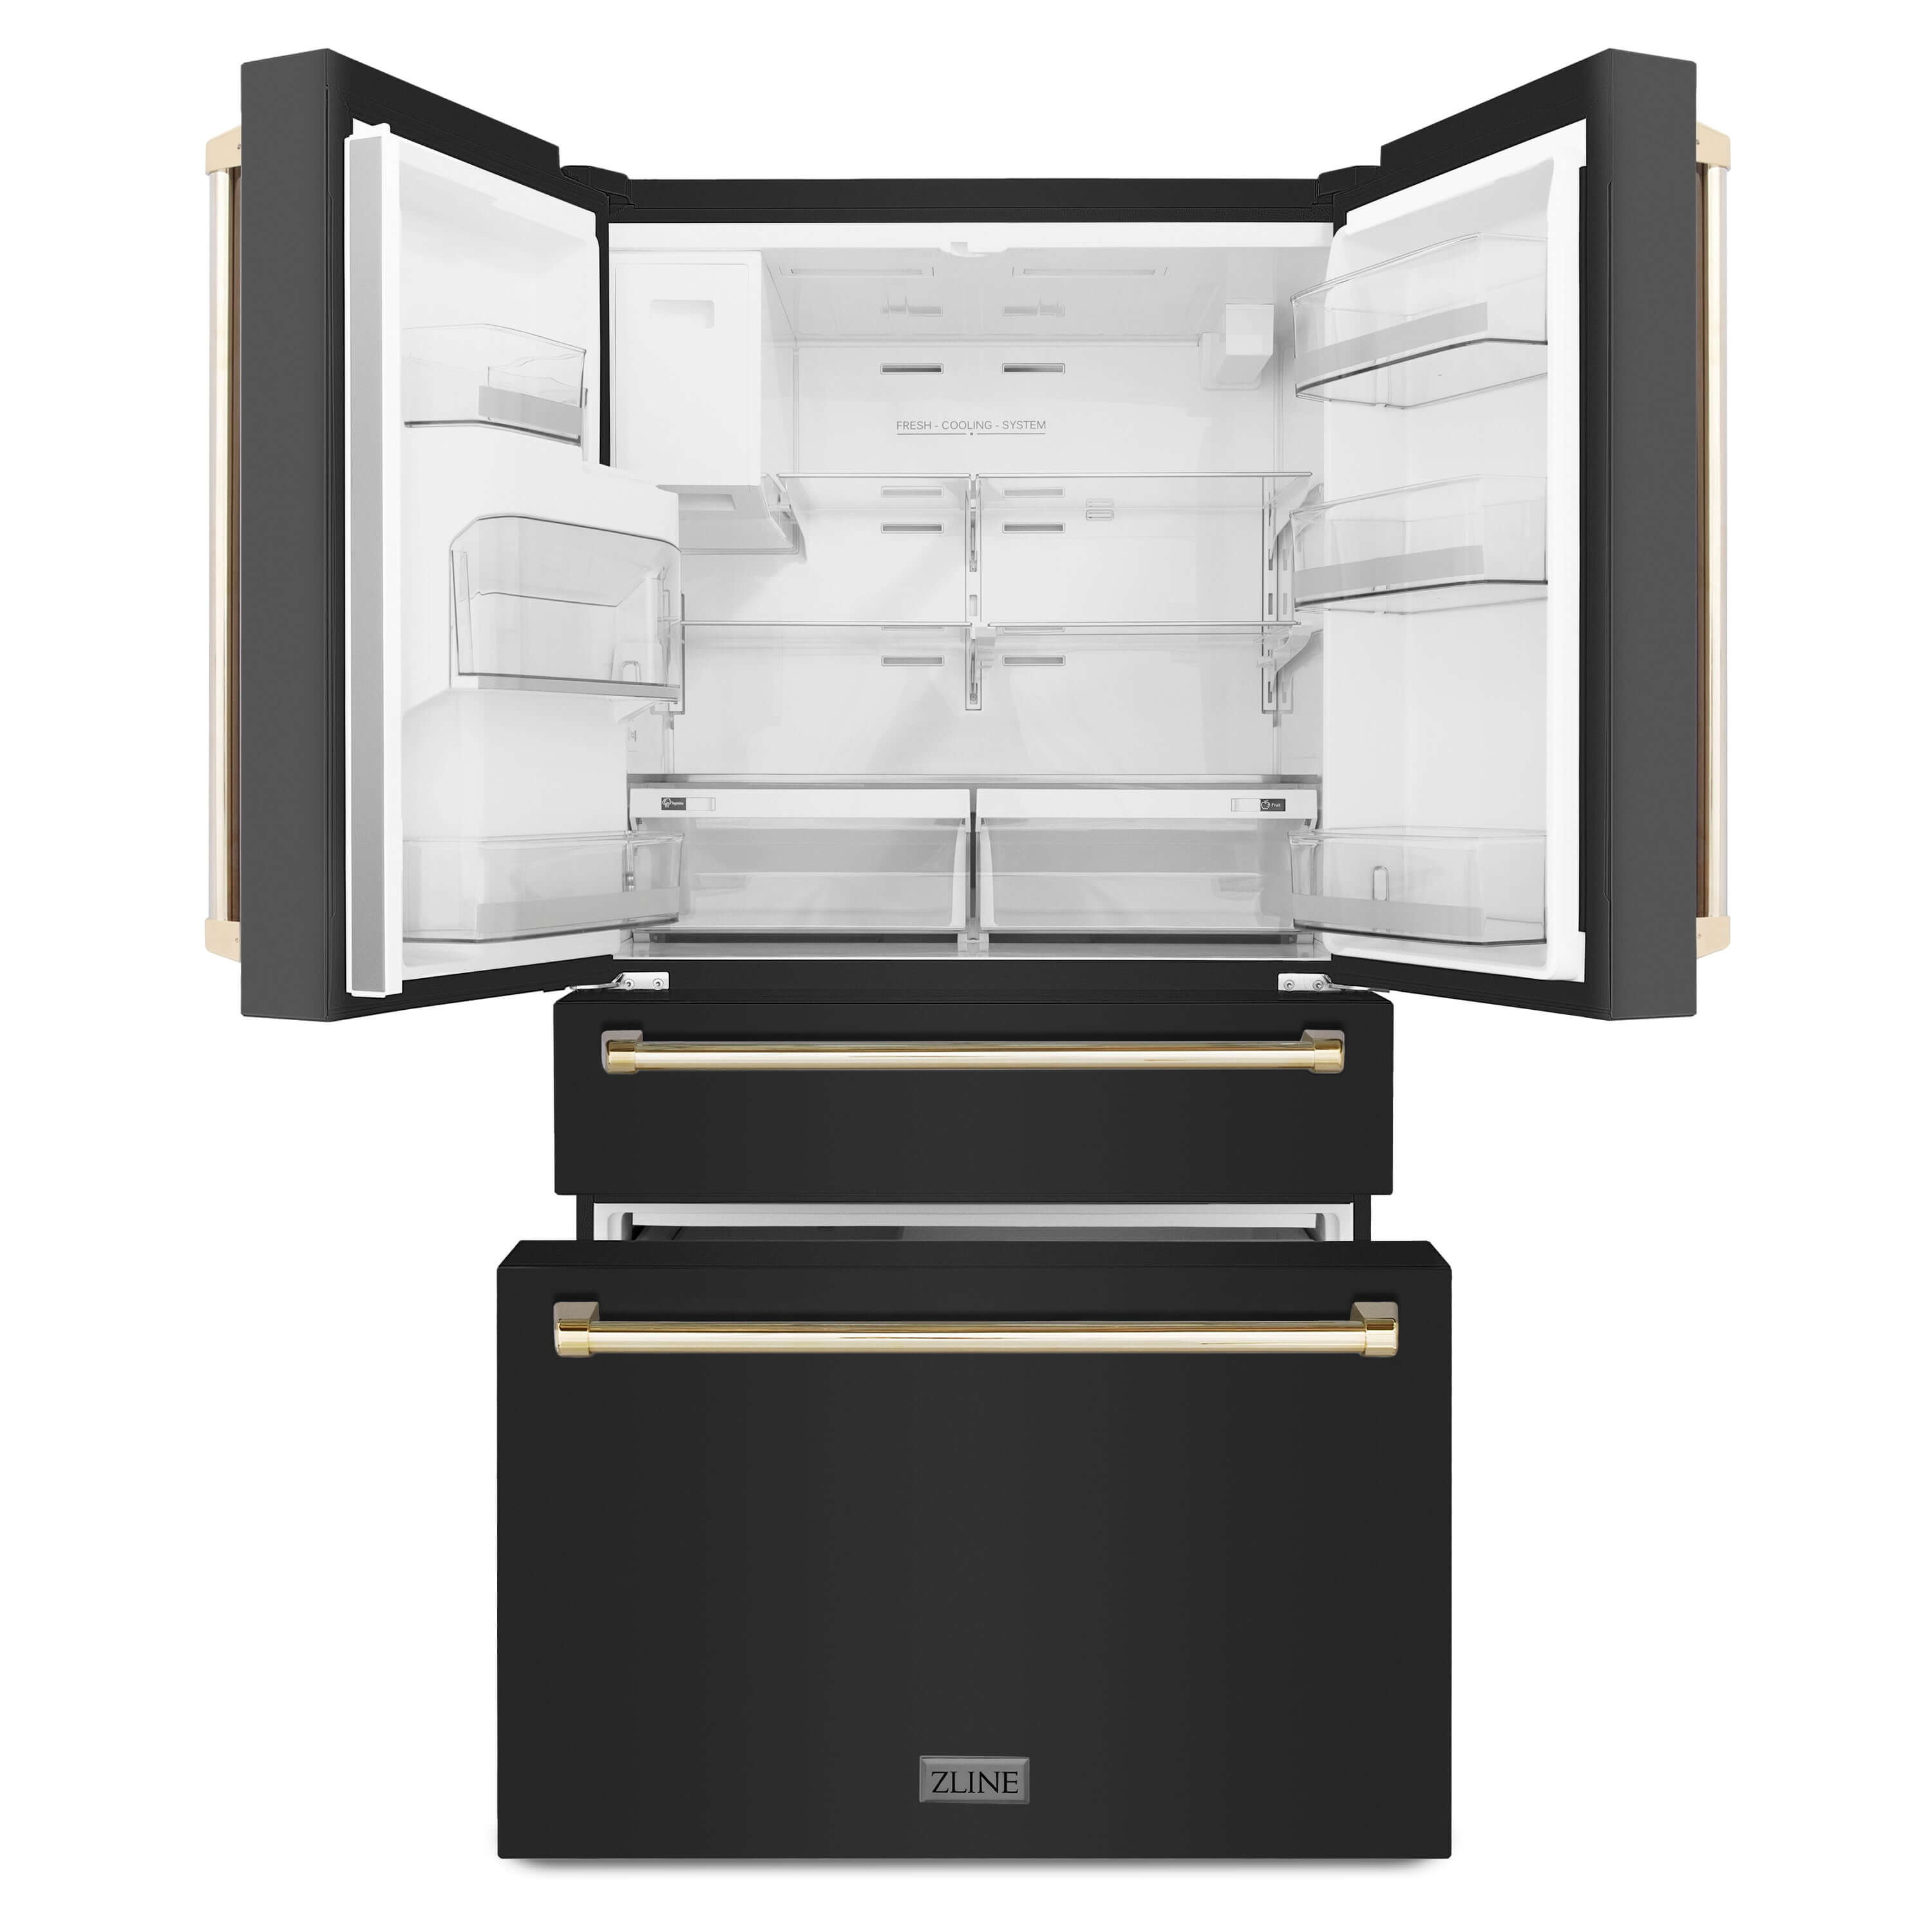 ZLINE 36 in. Black Stainless Steel French Door Refrigerator front with Polished Gold handles front doors and bottom freezer drawers open and internal LED lights on.